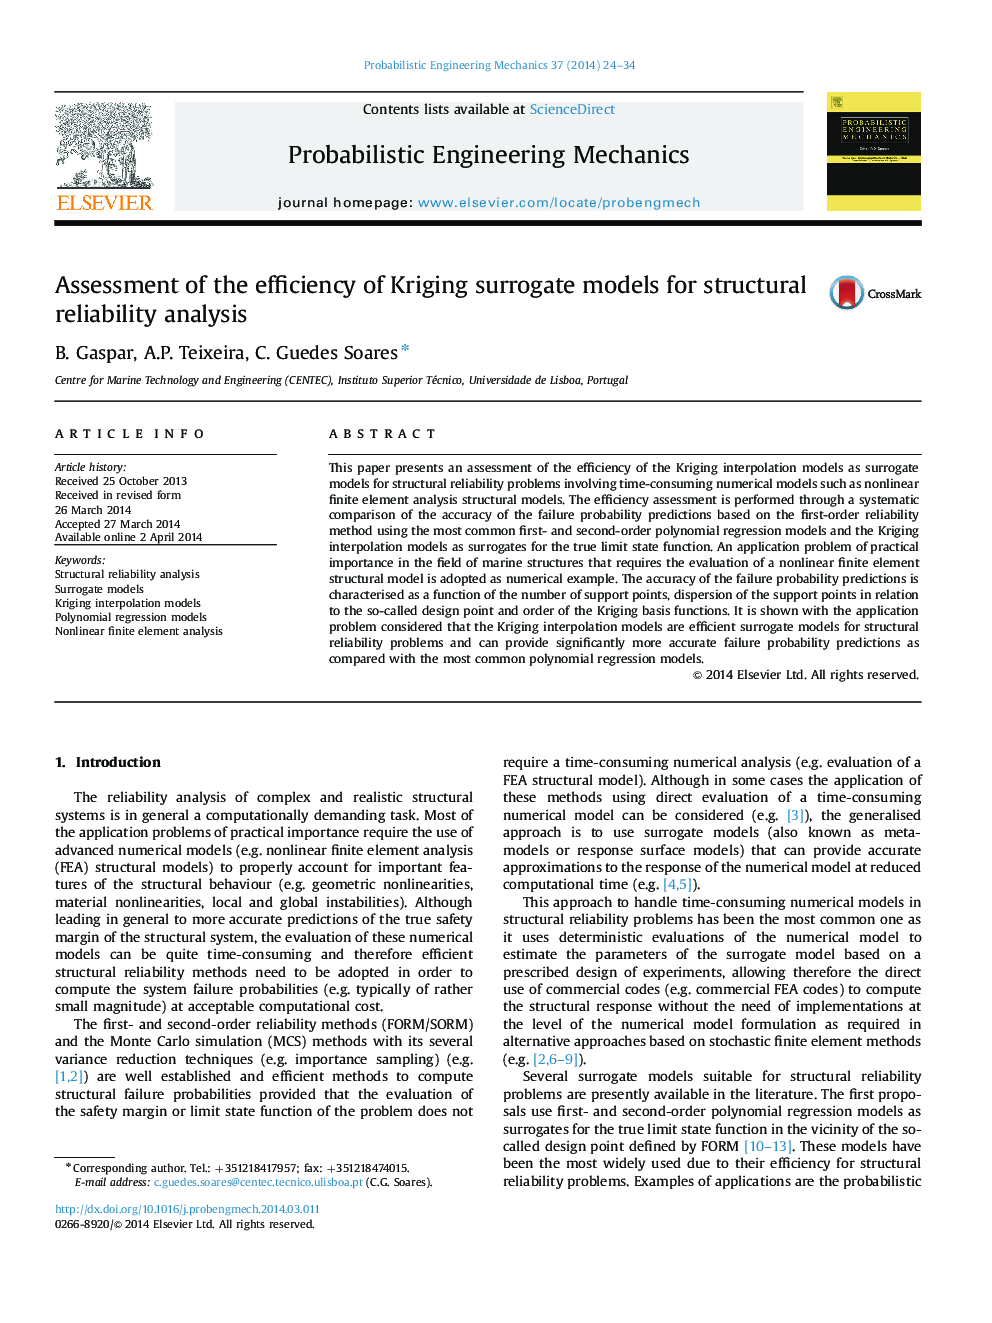 Assessment of the efficiency of Kriging surrogate models for structural reliability analysis